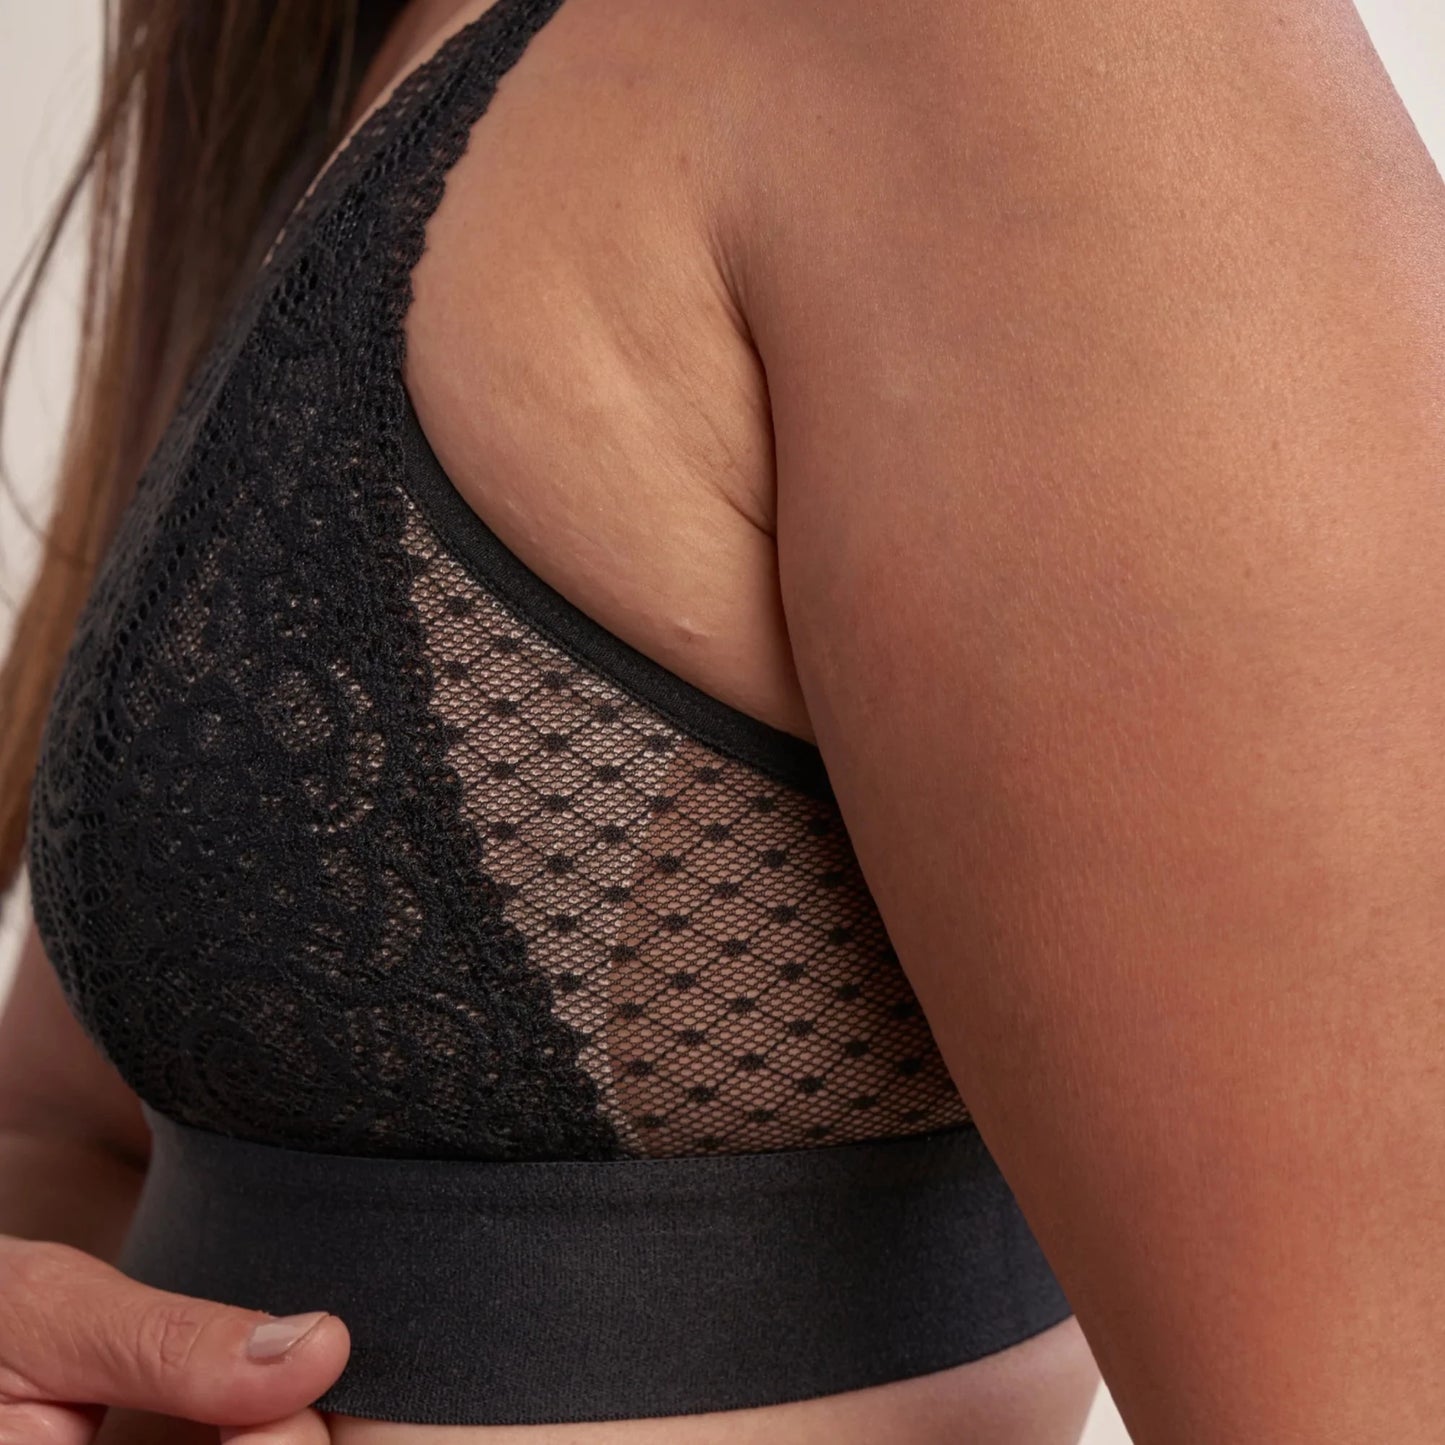 Maggie Lace Bralette in Black | AnaOno | Soft post-surgery bras made just for those affected by breast cancer, breast surgeries or discomfort.